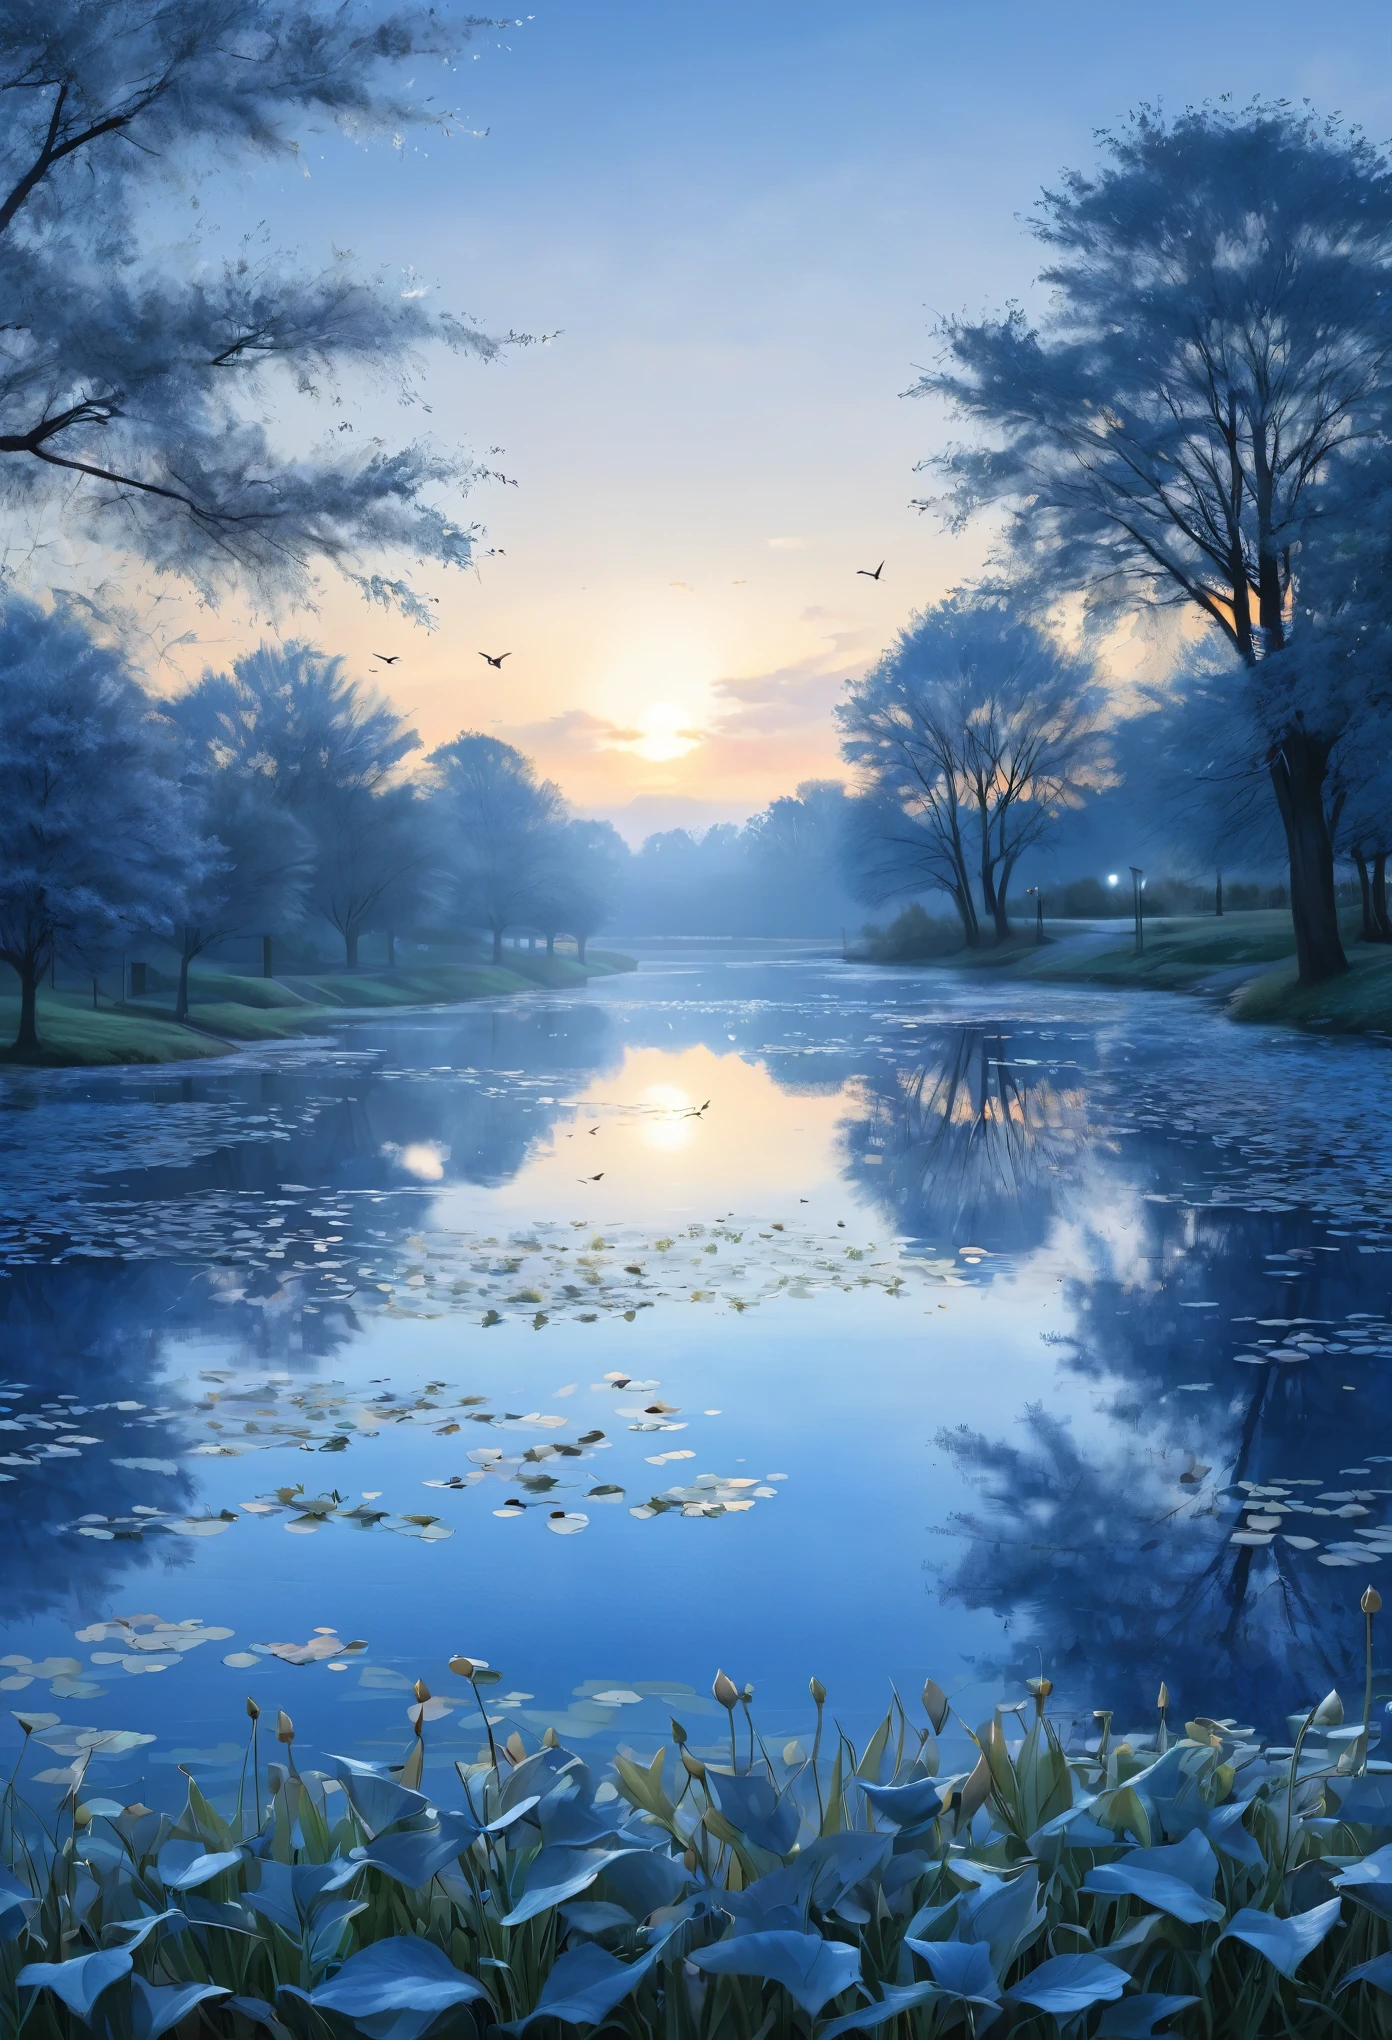 World, crowd, us, dawn and dusk, blue morning, distant hometown, once upon a time, sunny, youthful, blue morning, gray leaves, pond, evening breeze, distant light,(masterpiece, best quality:1.2), extremly detailed